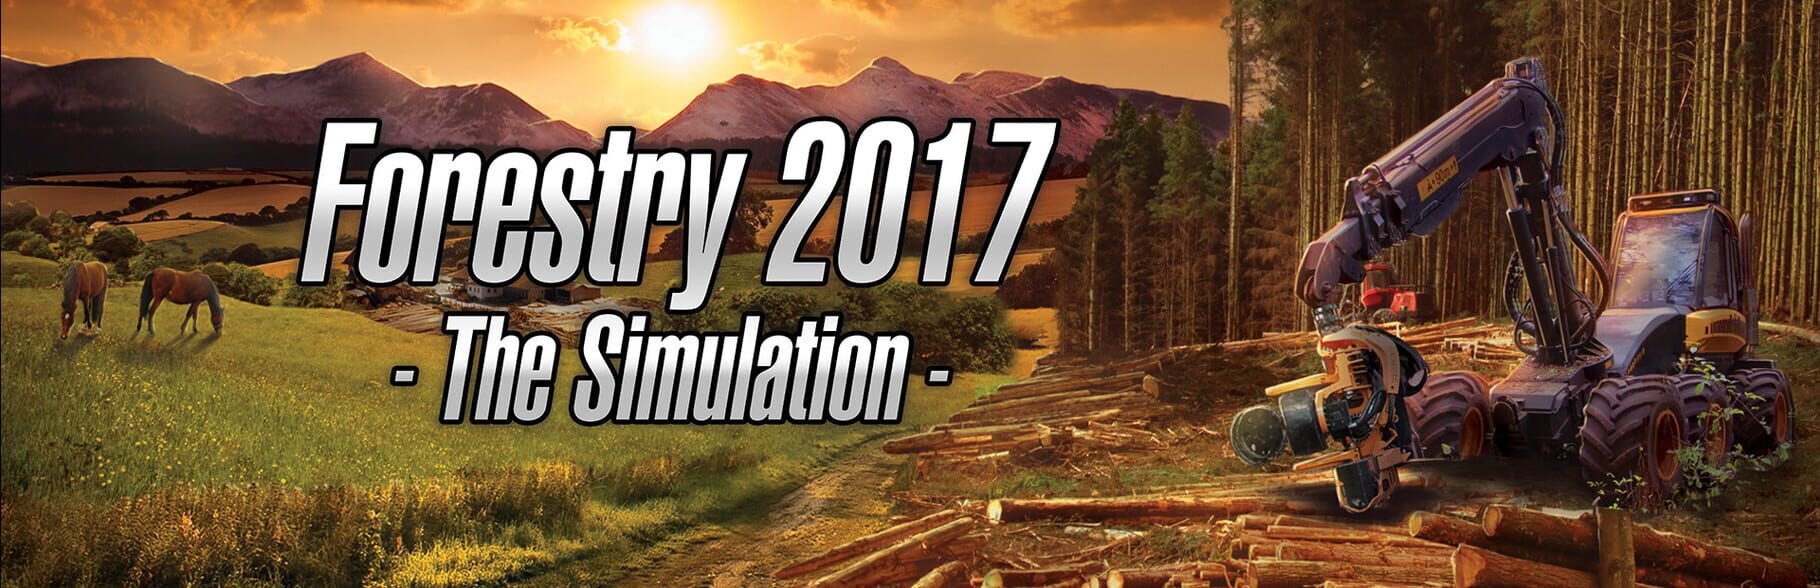 Forestry 2017 - The Simulation artwork